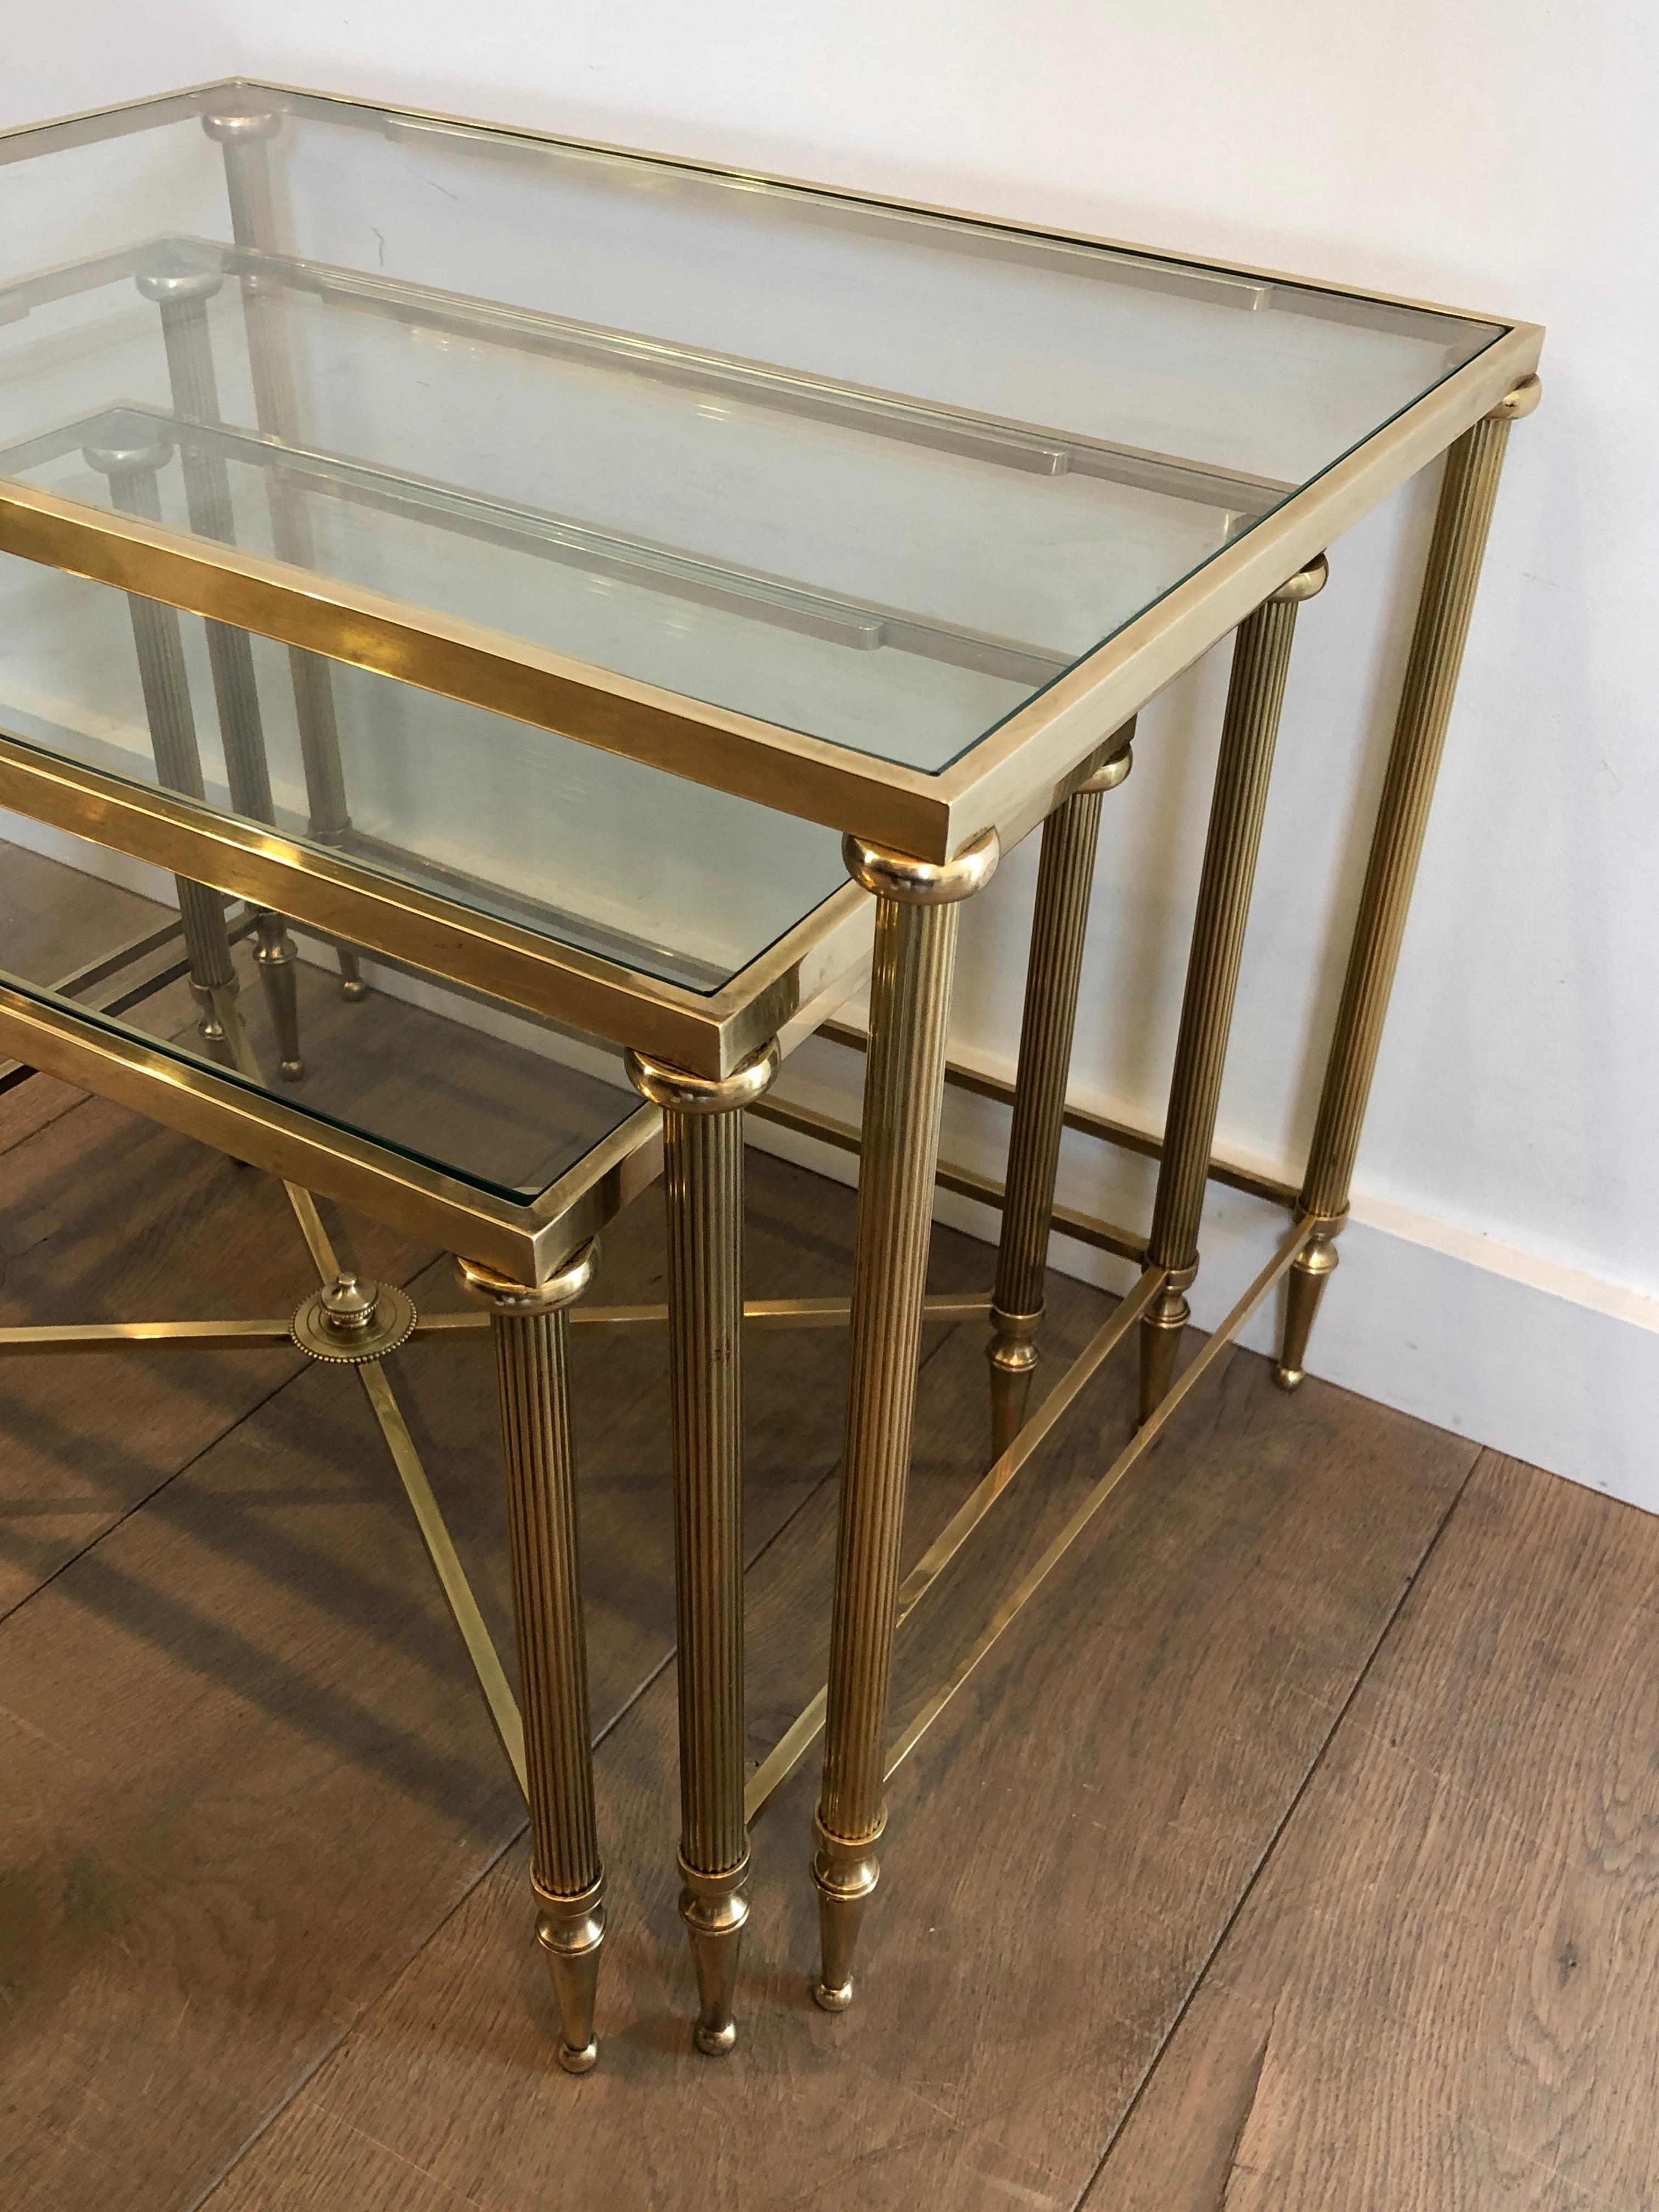 Mid-20th Century Maison Jansen, Set of 3 Brass and Glass Nesting Tables, French, Circa 1940